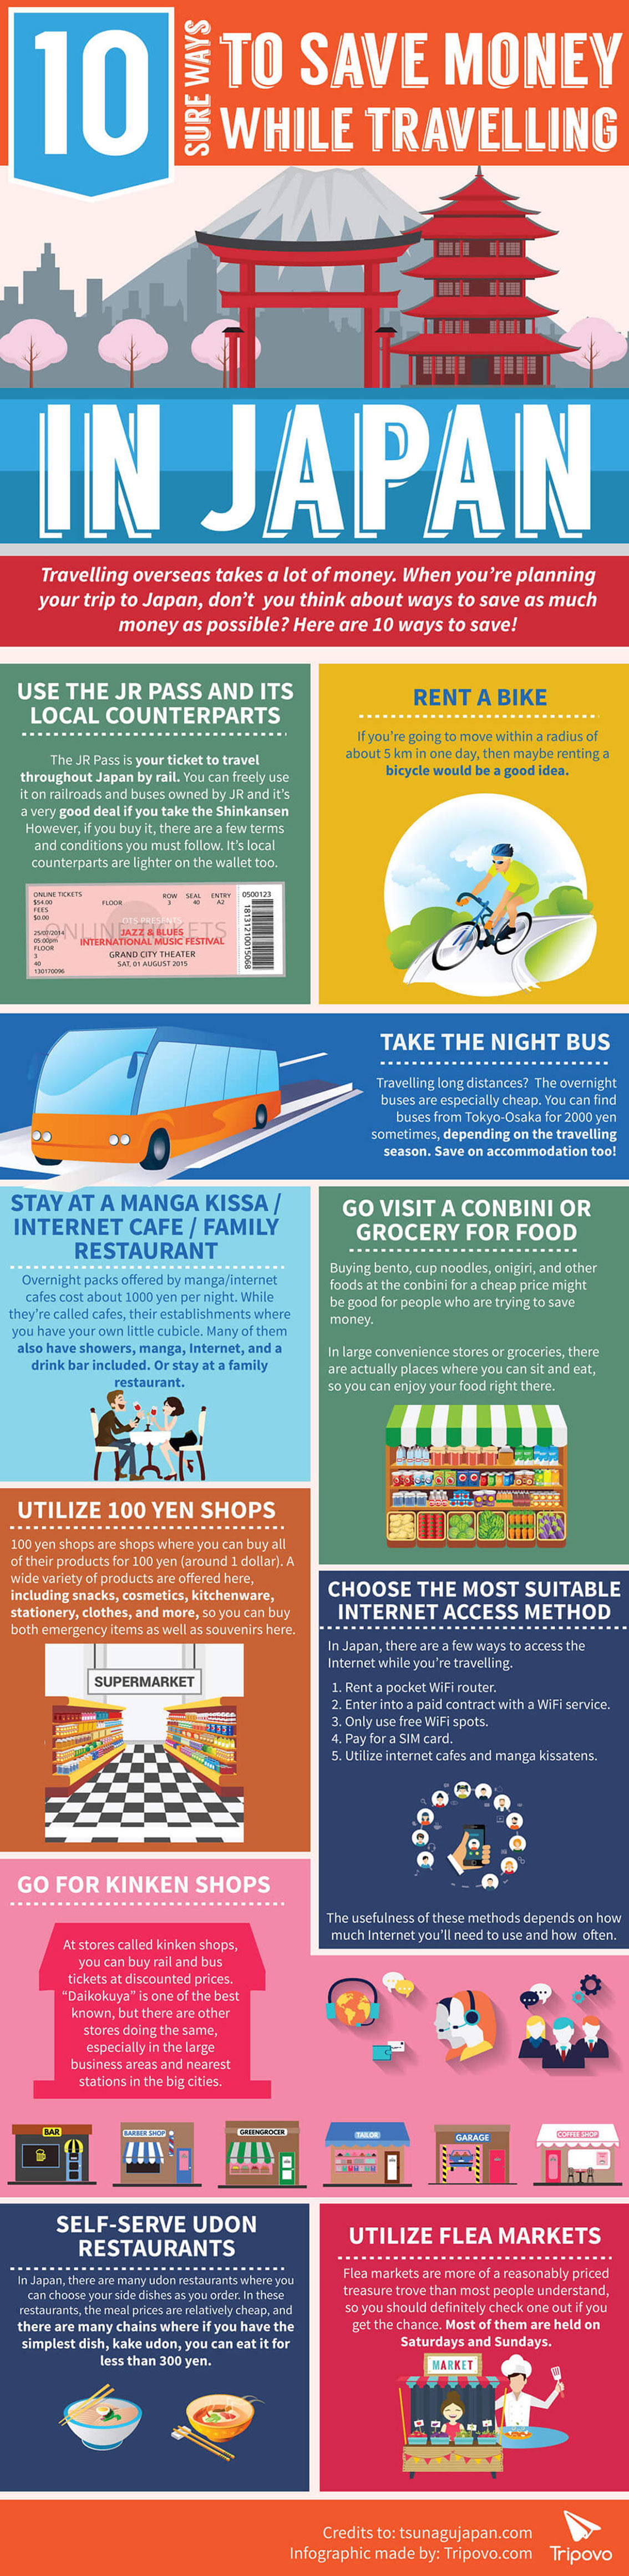 10 Sure Ways to Save Money While Traveling in Japan Travel Infographic